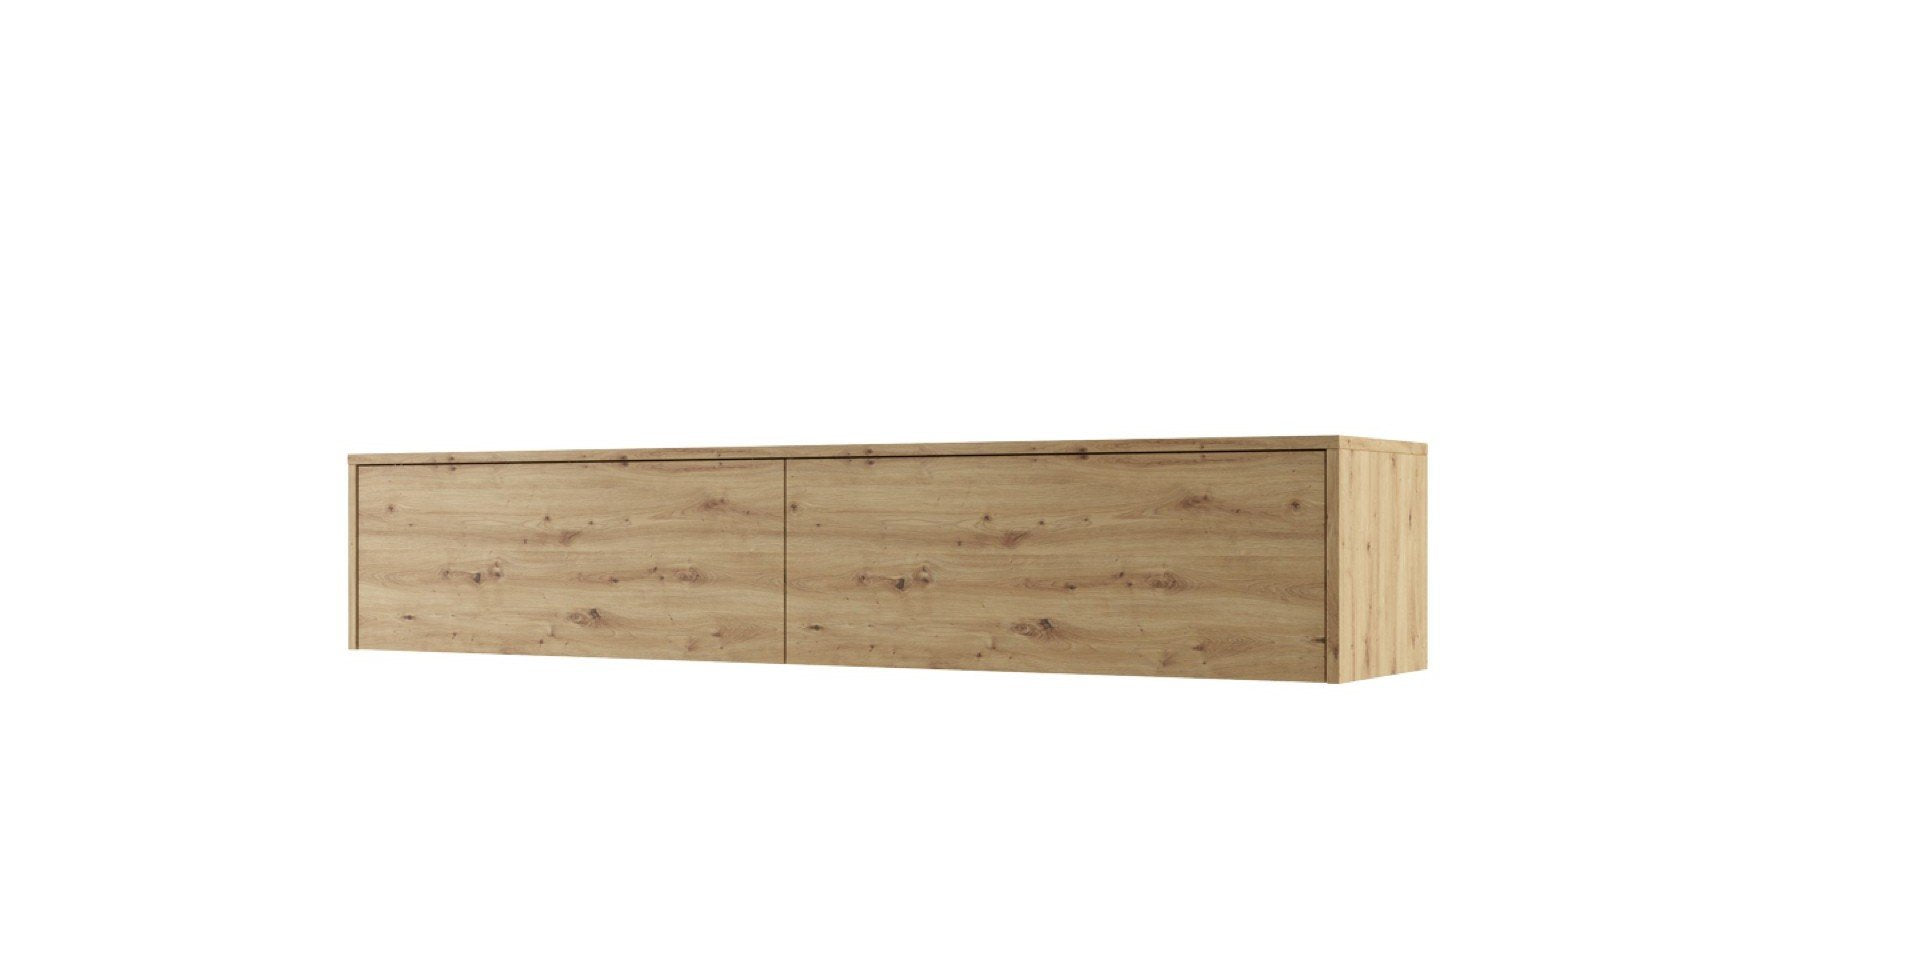 BC-15 Over Bed Unit for Horizontal Wall Bed Concept 160cm Oak Artisan Wall Bed with Storage Unit 